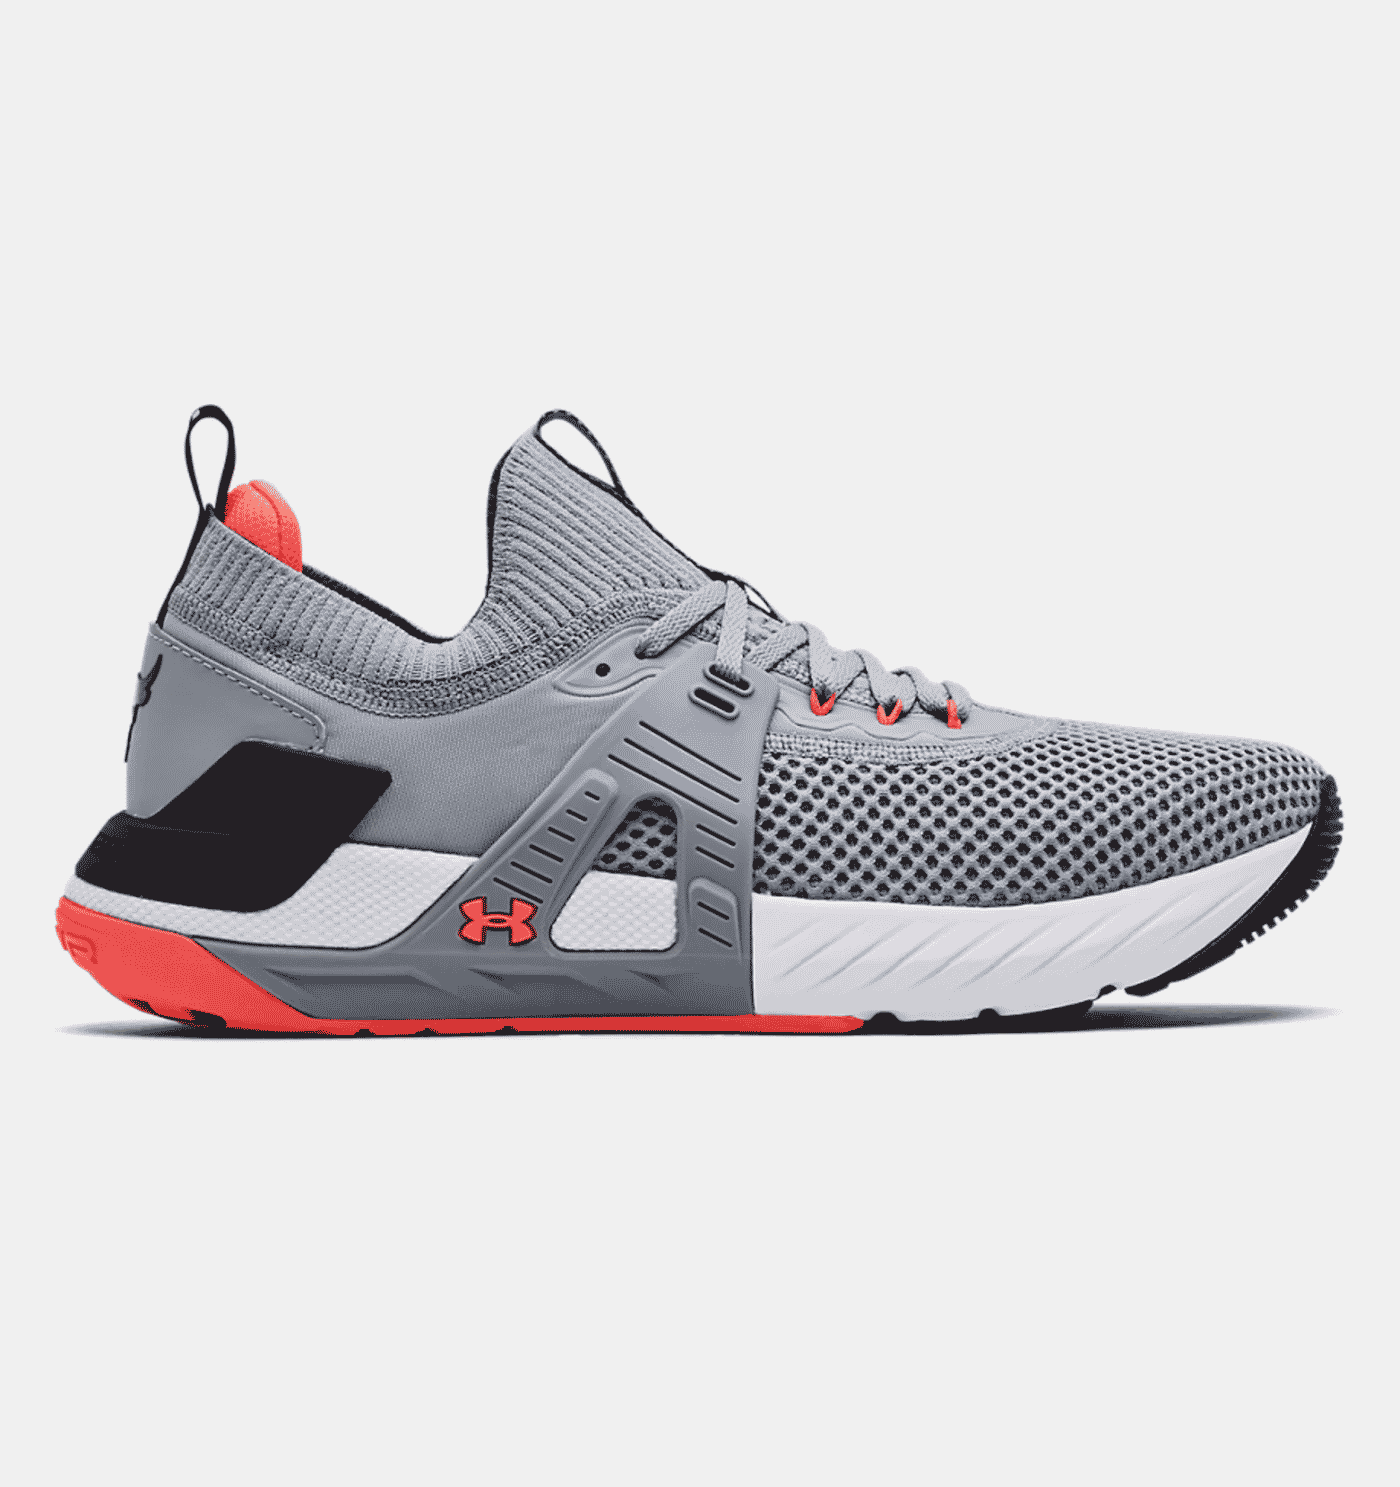 Mens-project-4-Training-shoe-grey-red-and-white